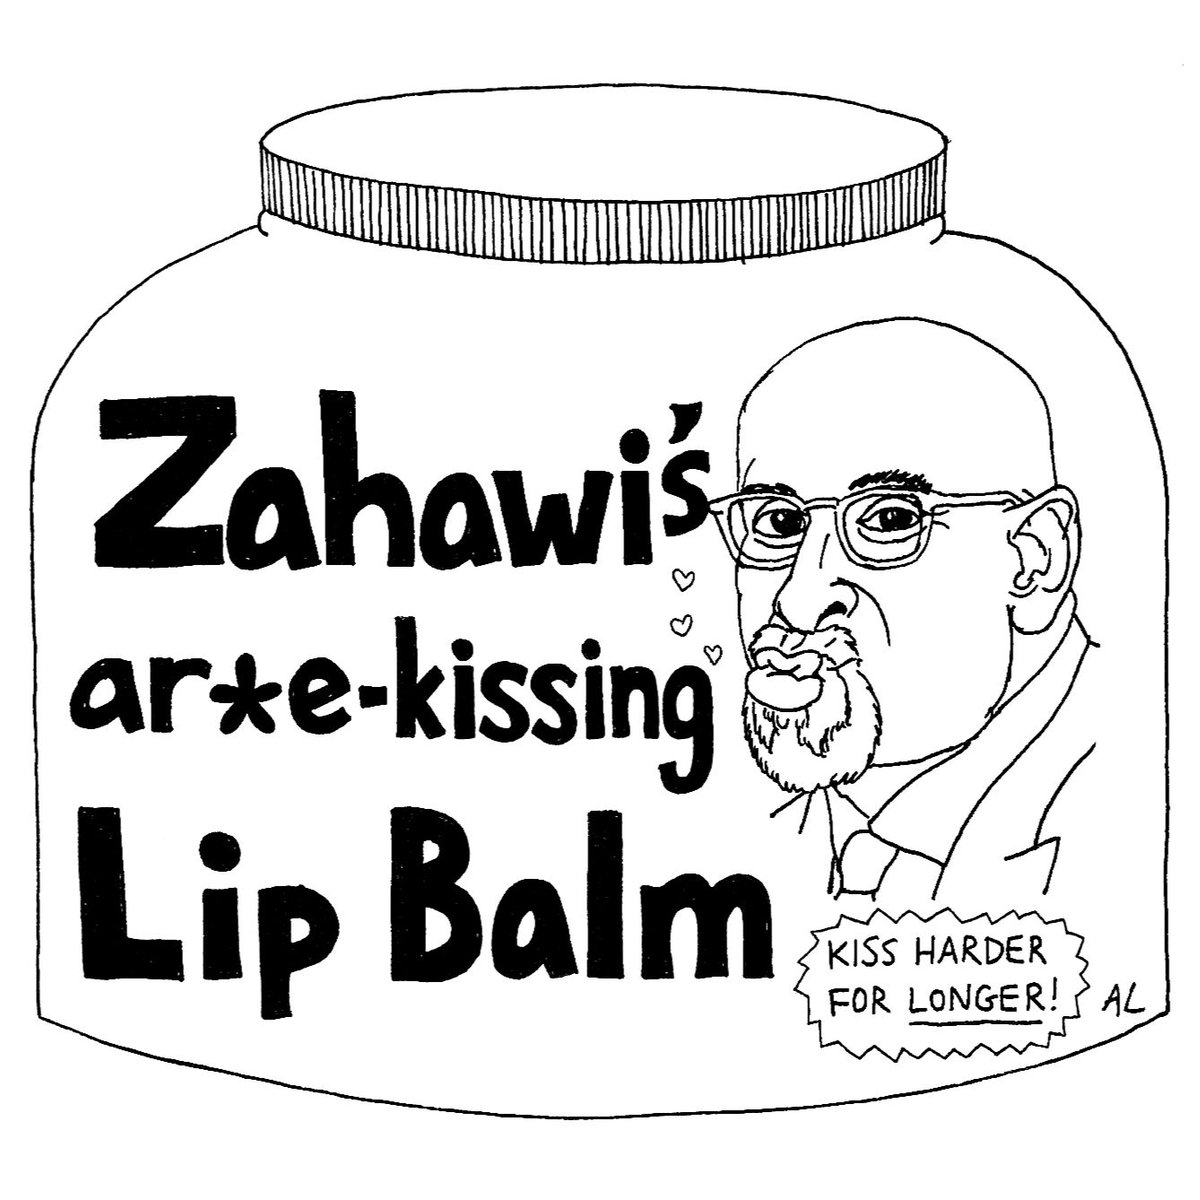 It will take vats of this if Nadhim Zahawi wants to win over HMRC. We all know he already does plenty of kissing in the Conservative Party...

#ZahawiOut #NadhimZahawiTaxDodger #TorySleaze